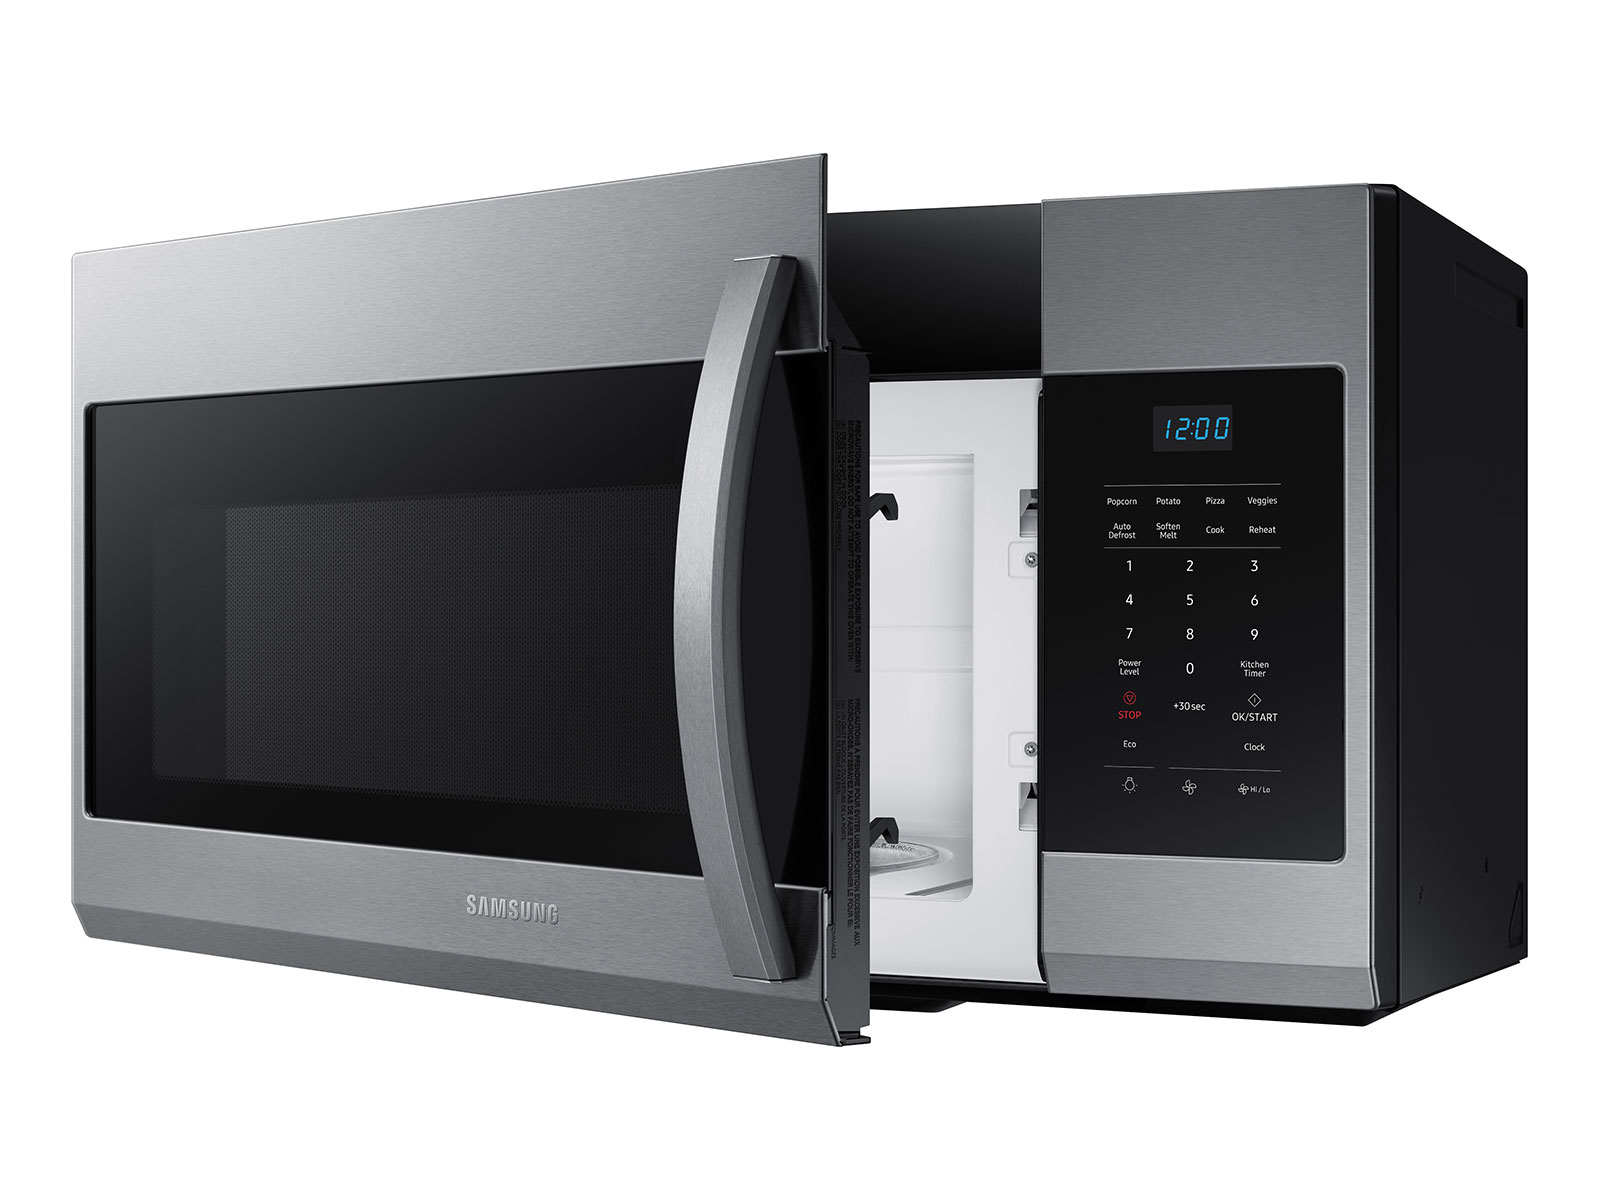 Samsung - 1.7 Cu. ft. Over-the-range Microwave - Stainless Steel